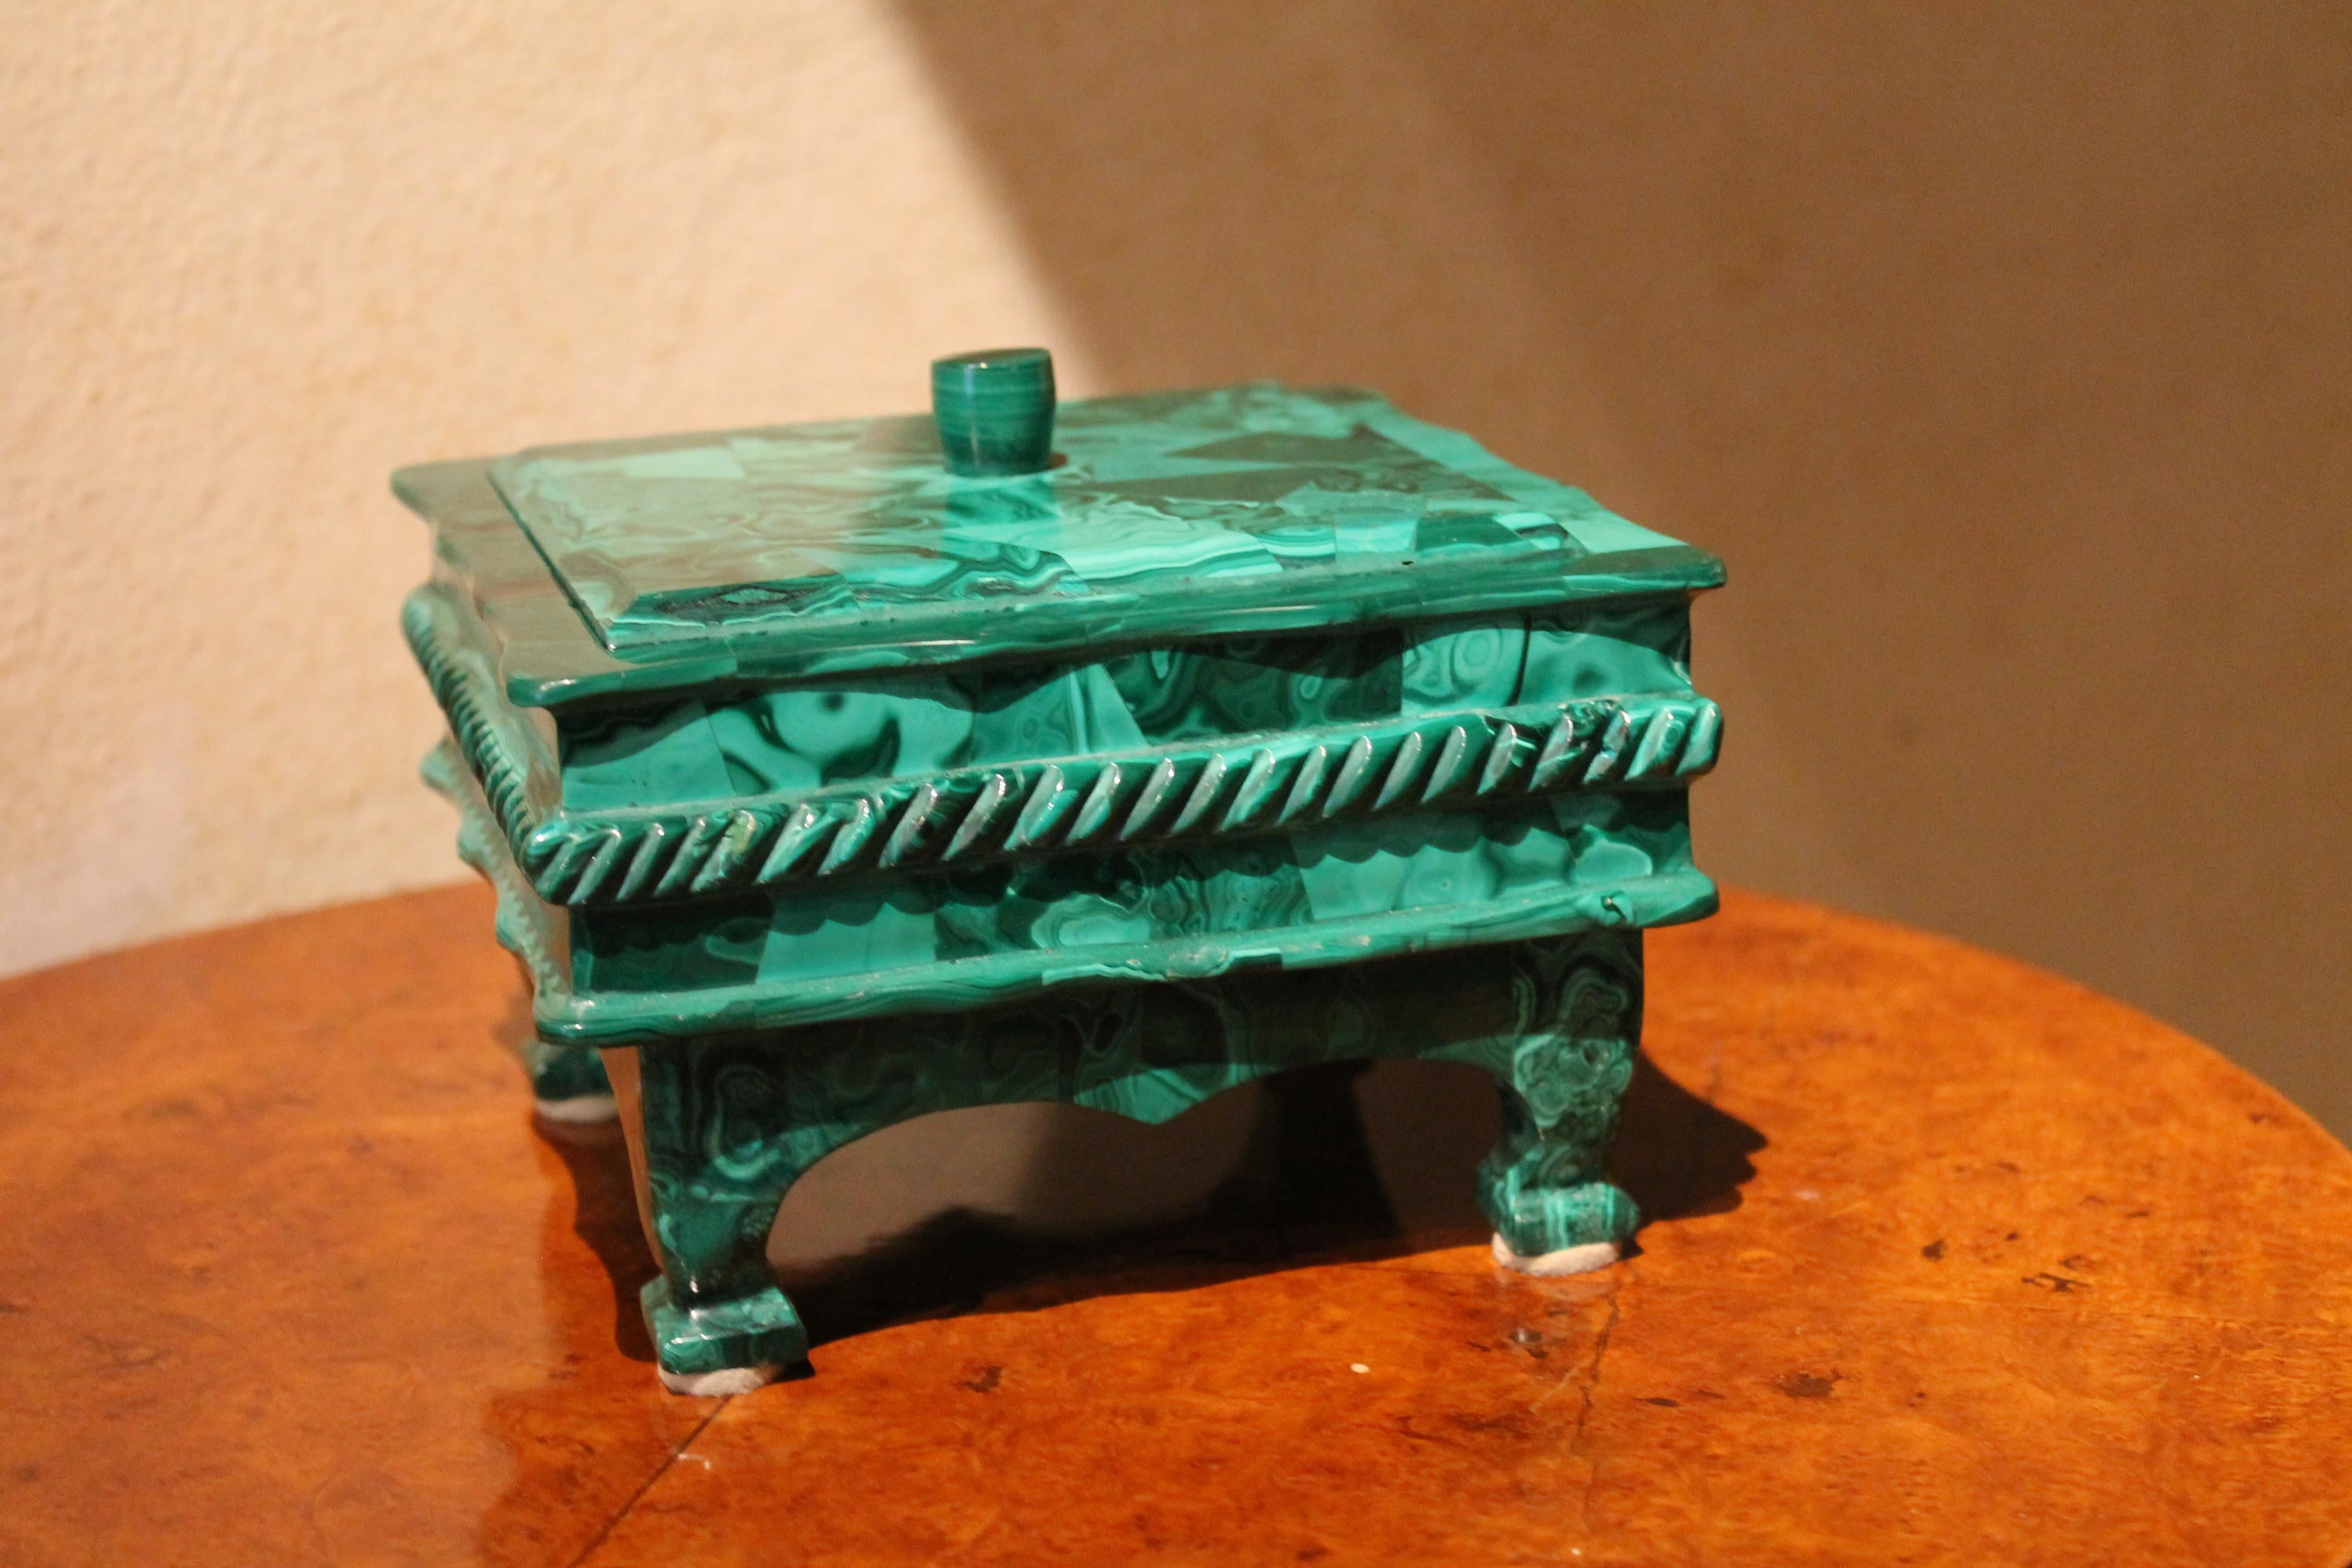 Malachite, one of the most sought after and wonderful semi-precious stones, is the material with which this delightful late 19th-early 20th century lidded box is made of. The workmanship is equally sought after, the jewelry or trinket box features